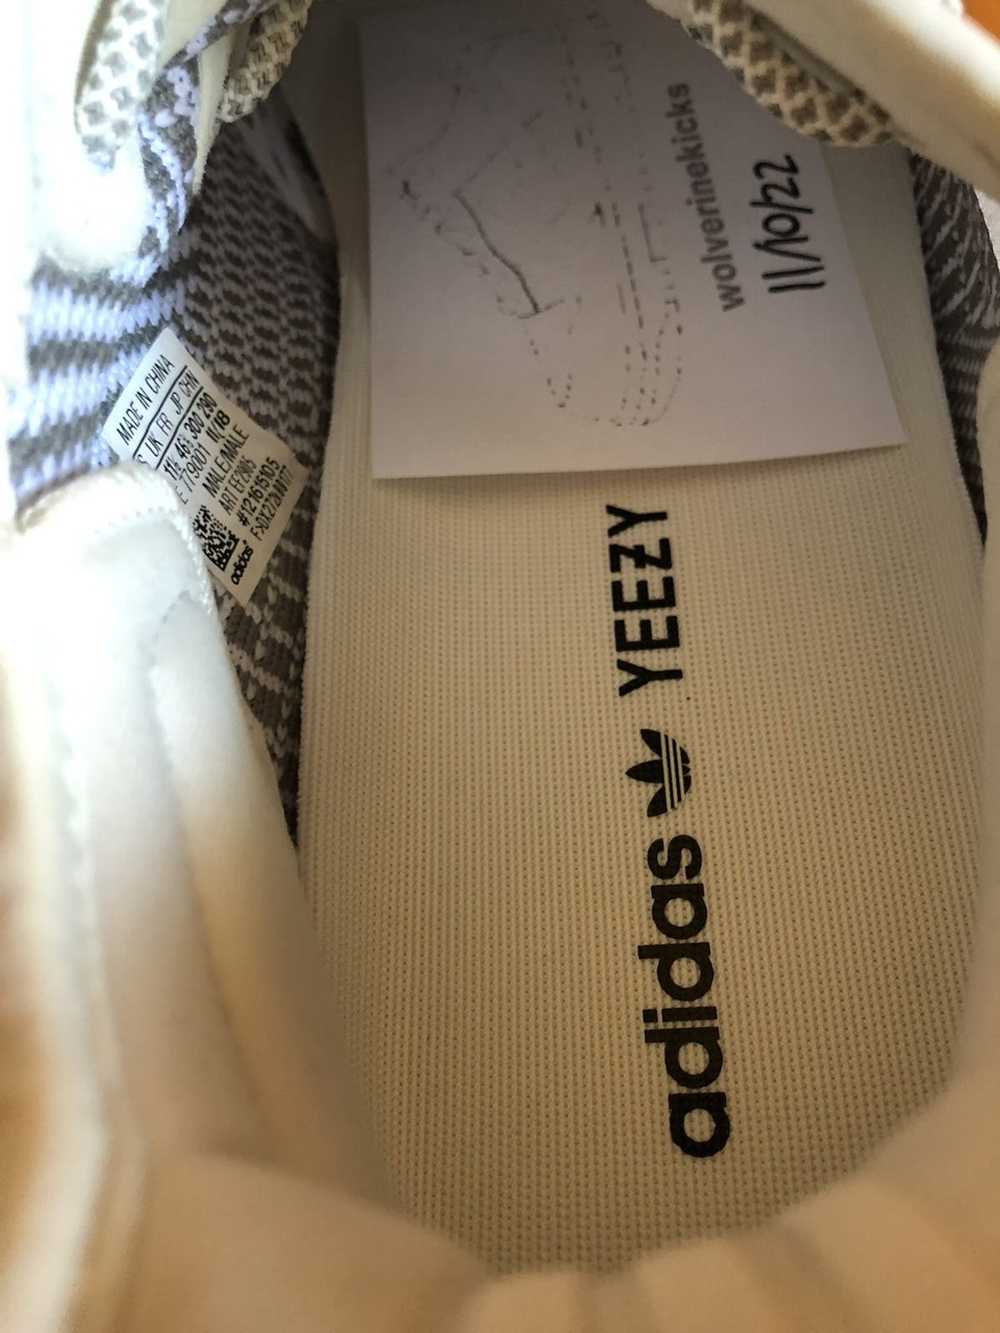 Adidas Yeezy Boost 350 V2 Static Non-Reflective - image 6